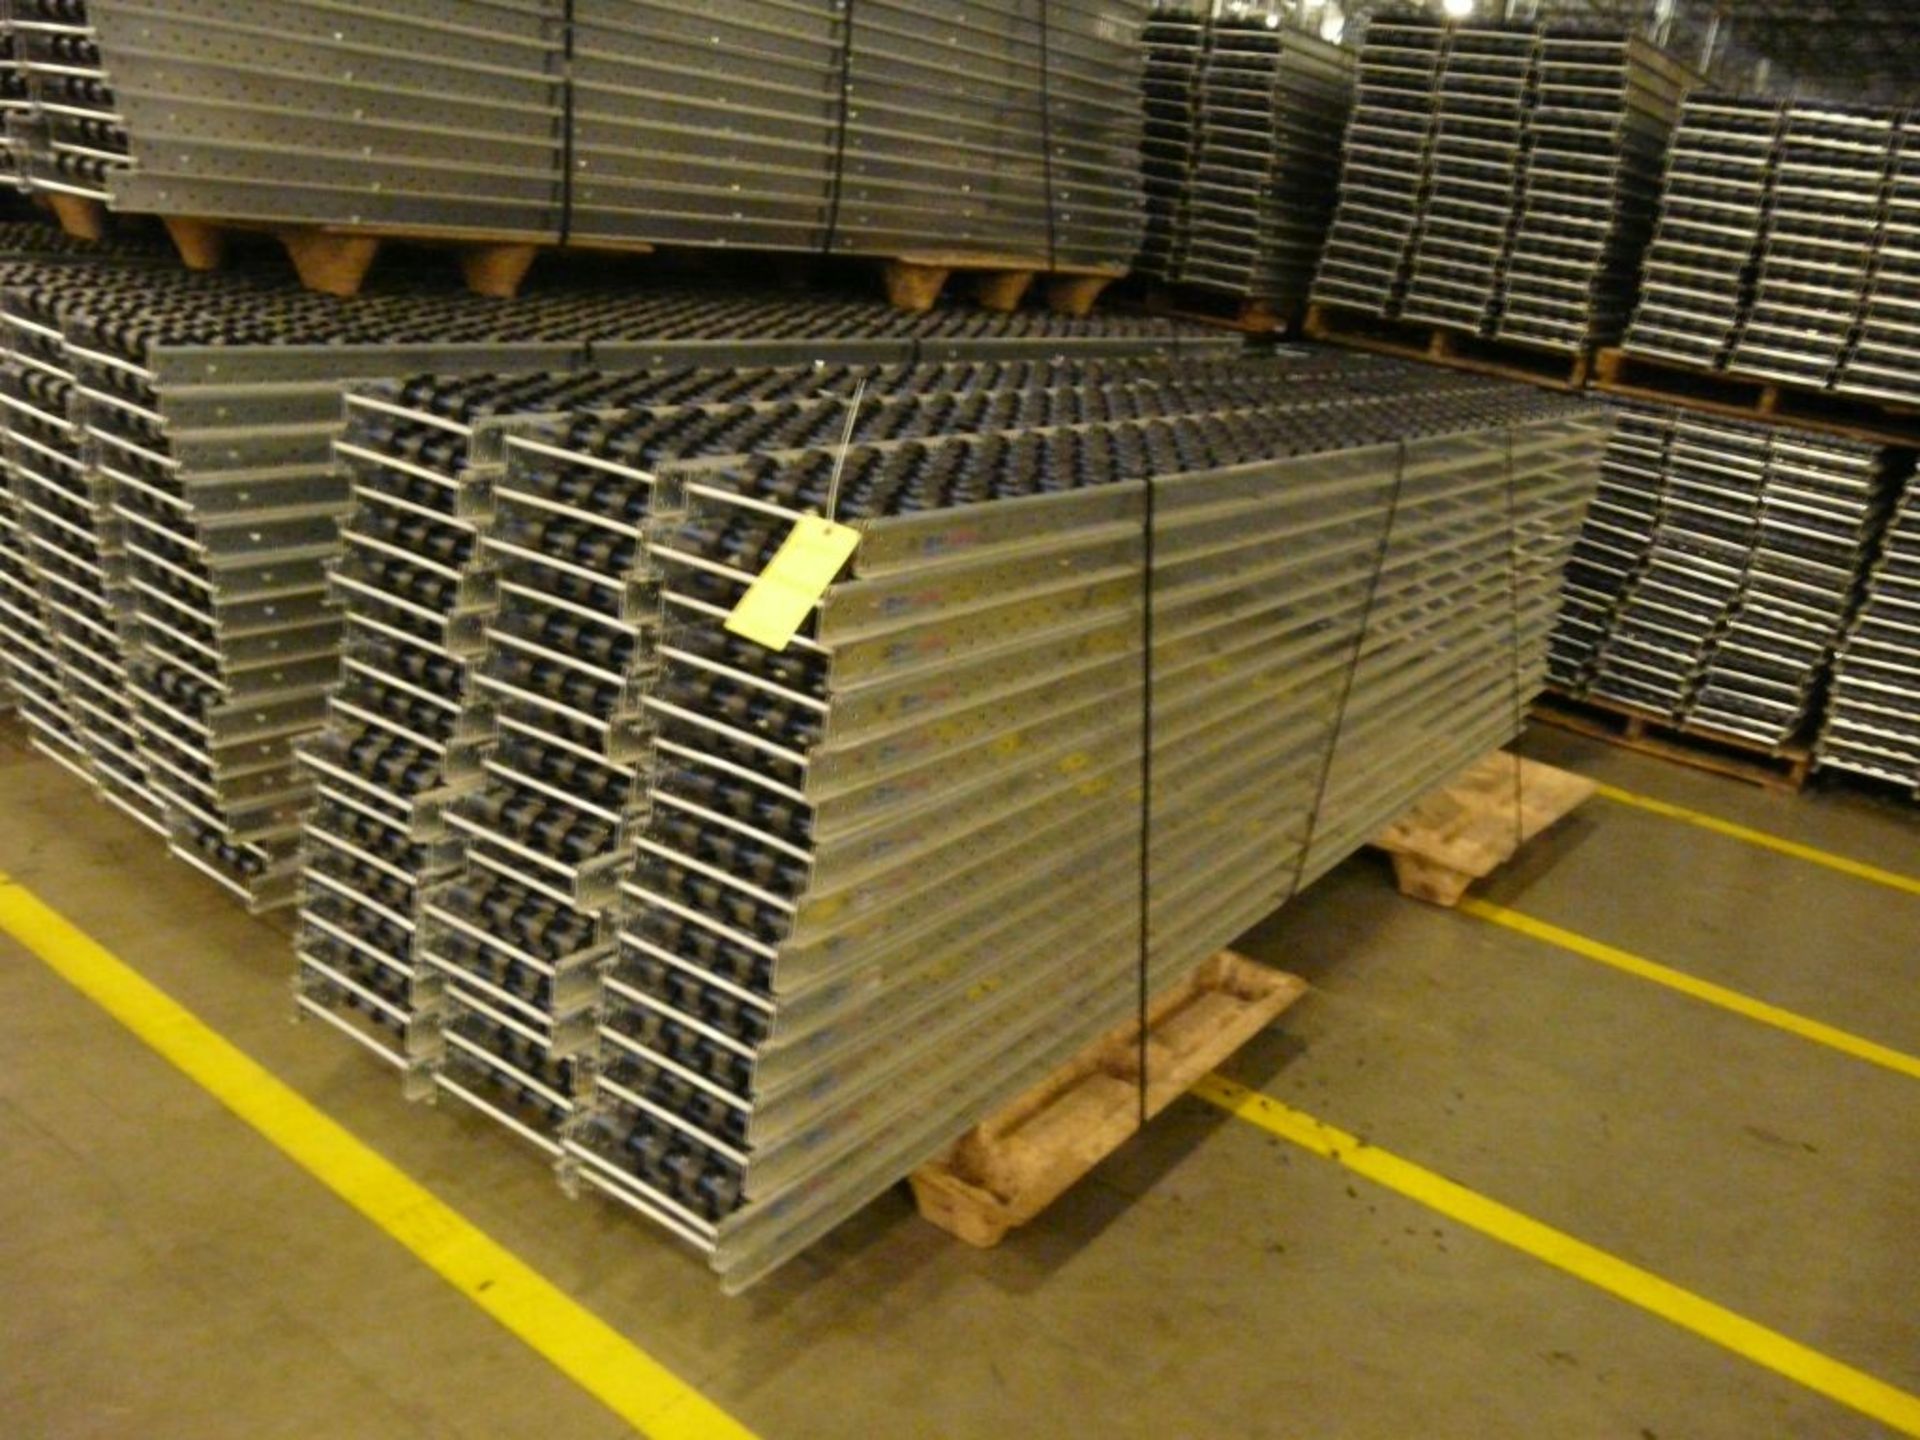 Lot of (90) SpanTrack Wheelbed Carton Flow Conveyors - 11.5'L x 11"W; Tag: 223653 - $30 Lot